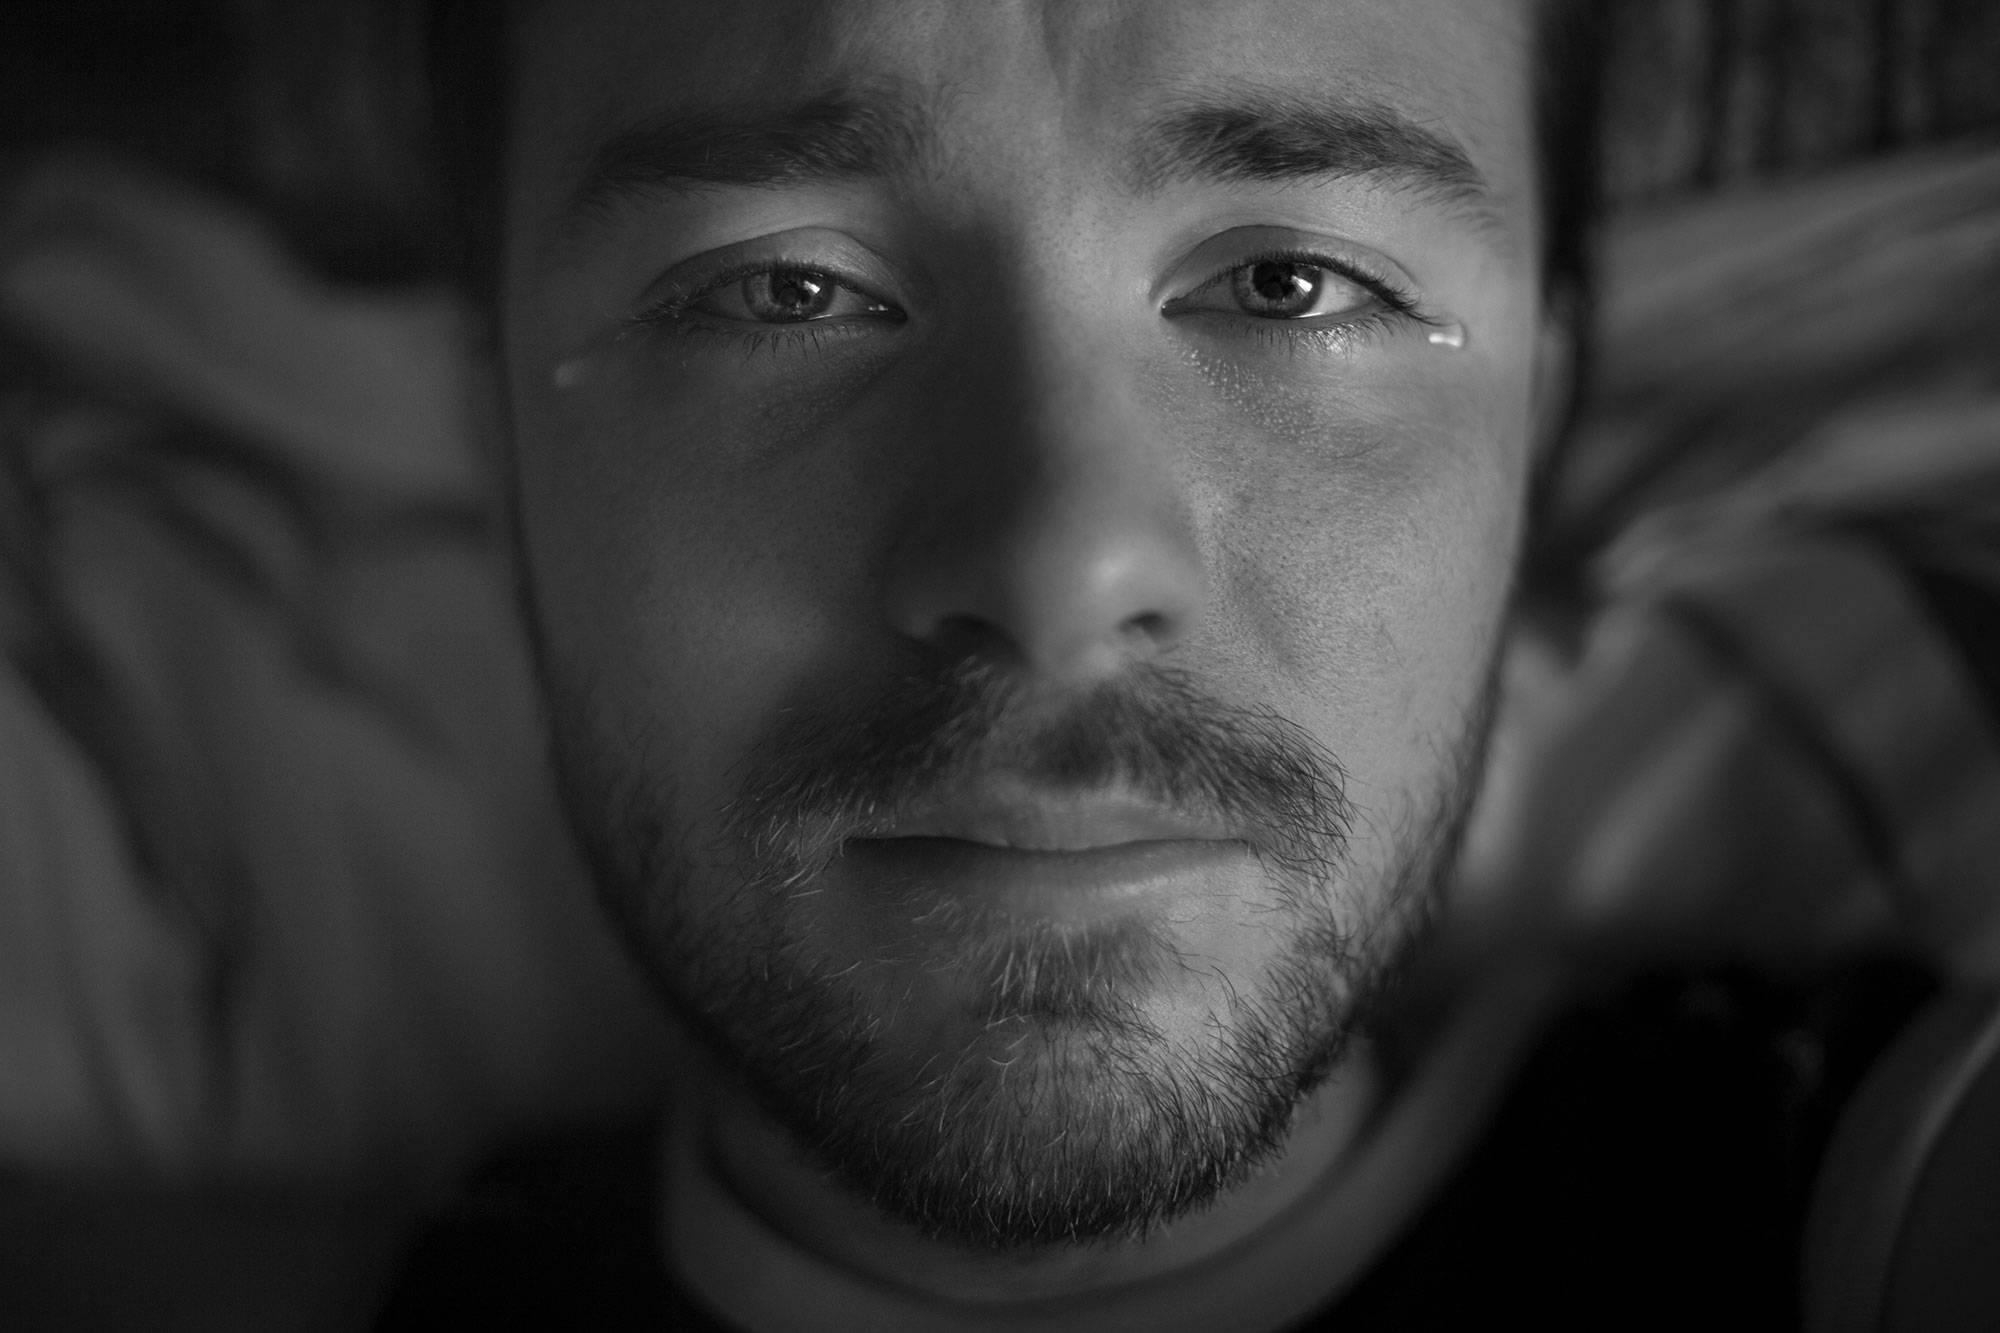 Portrait Of A Man With A Beard Crying At The Camera In Tears With Beautiful Eyes